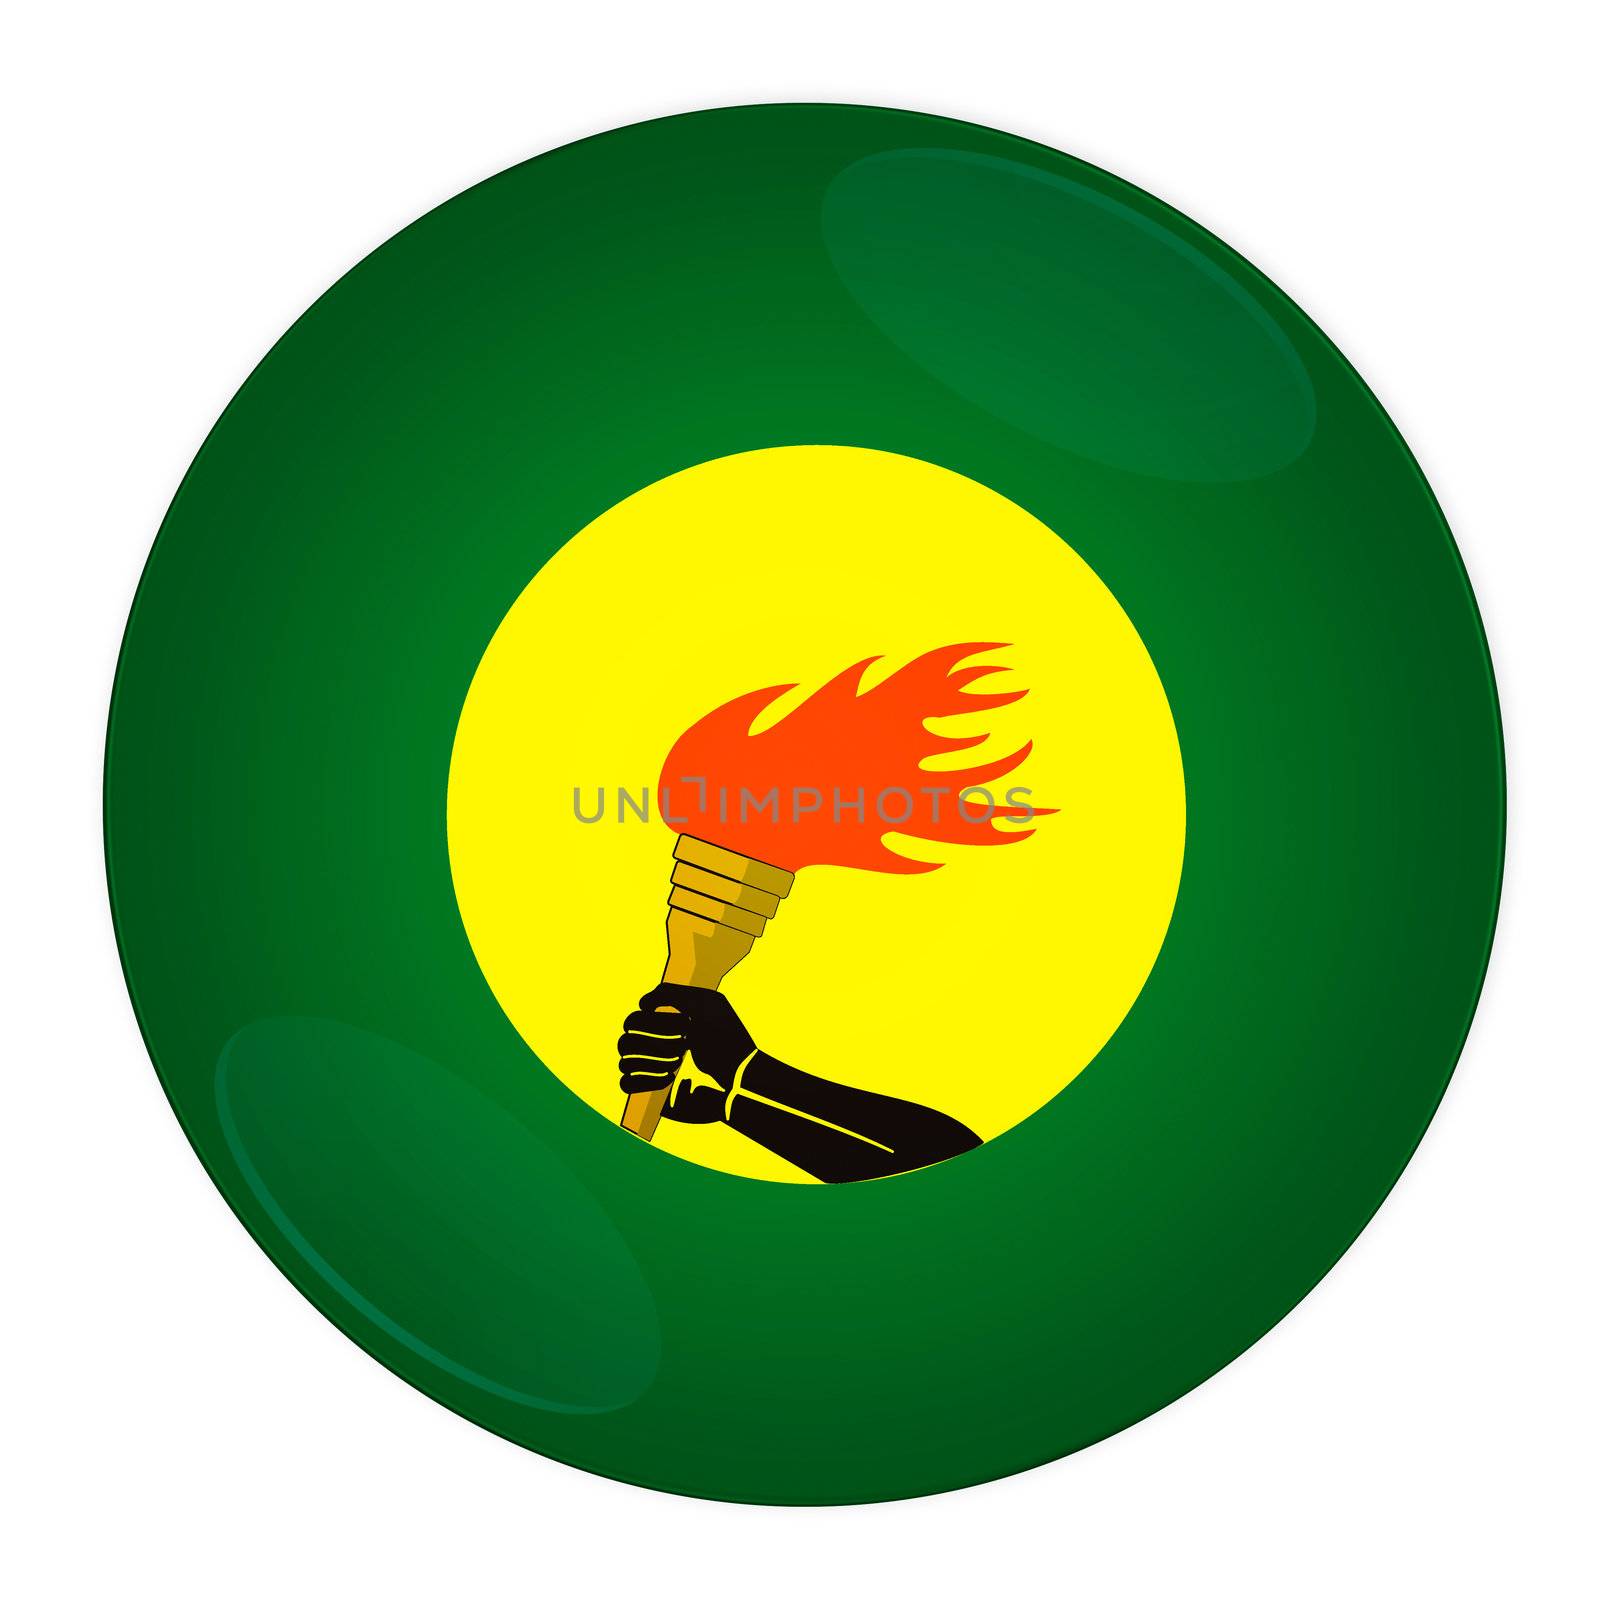 Abstract illustration: button with flag from Zaire country